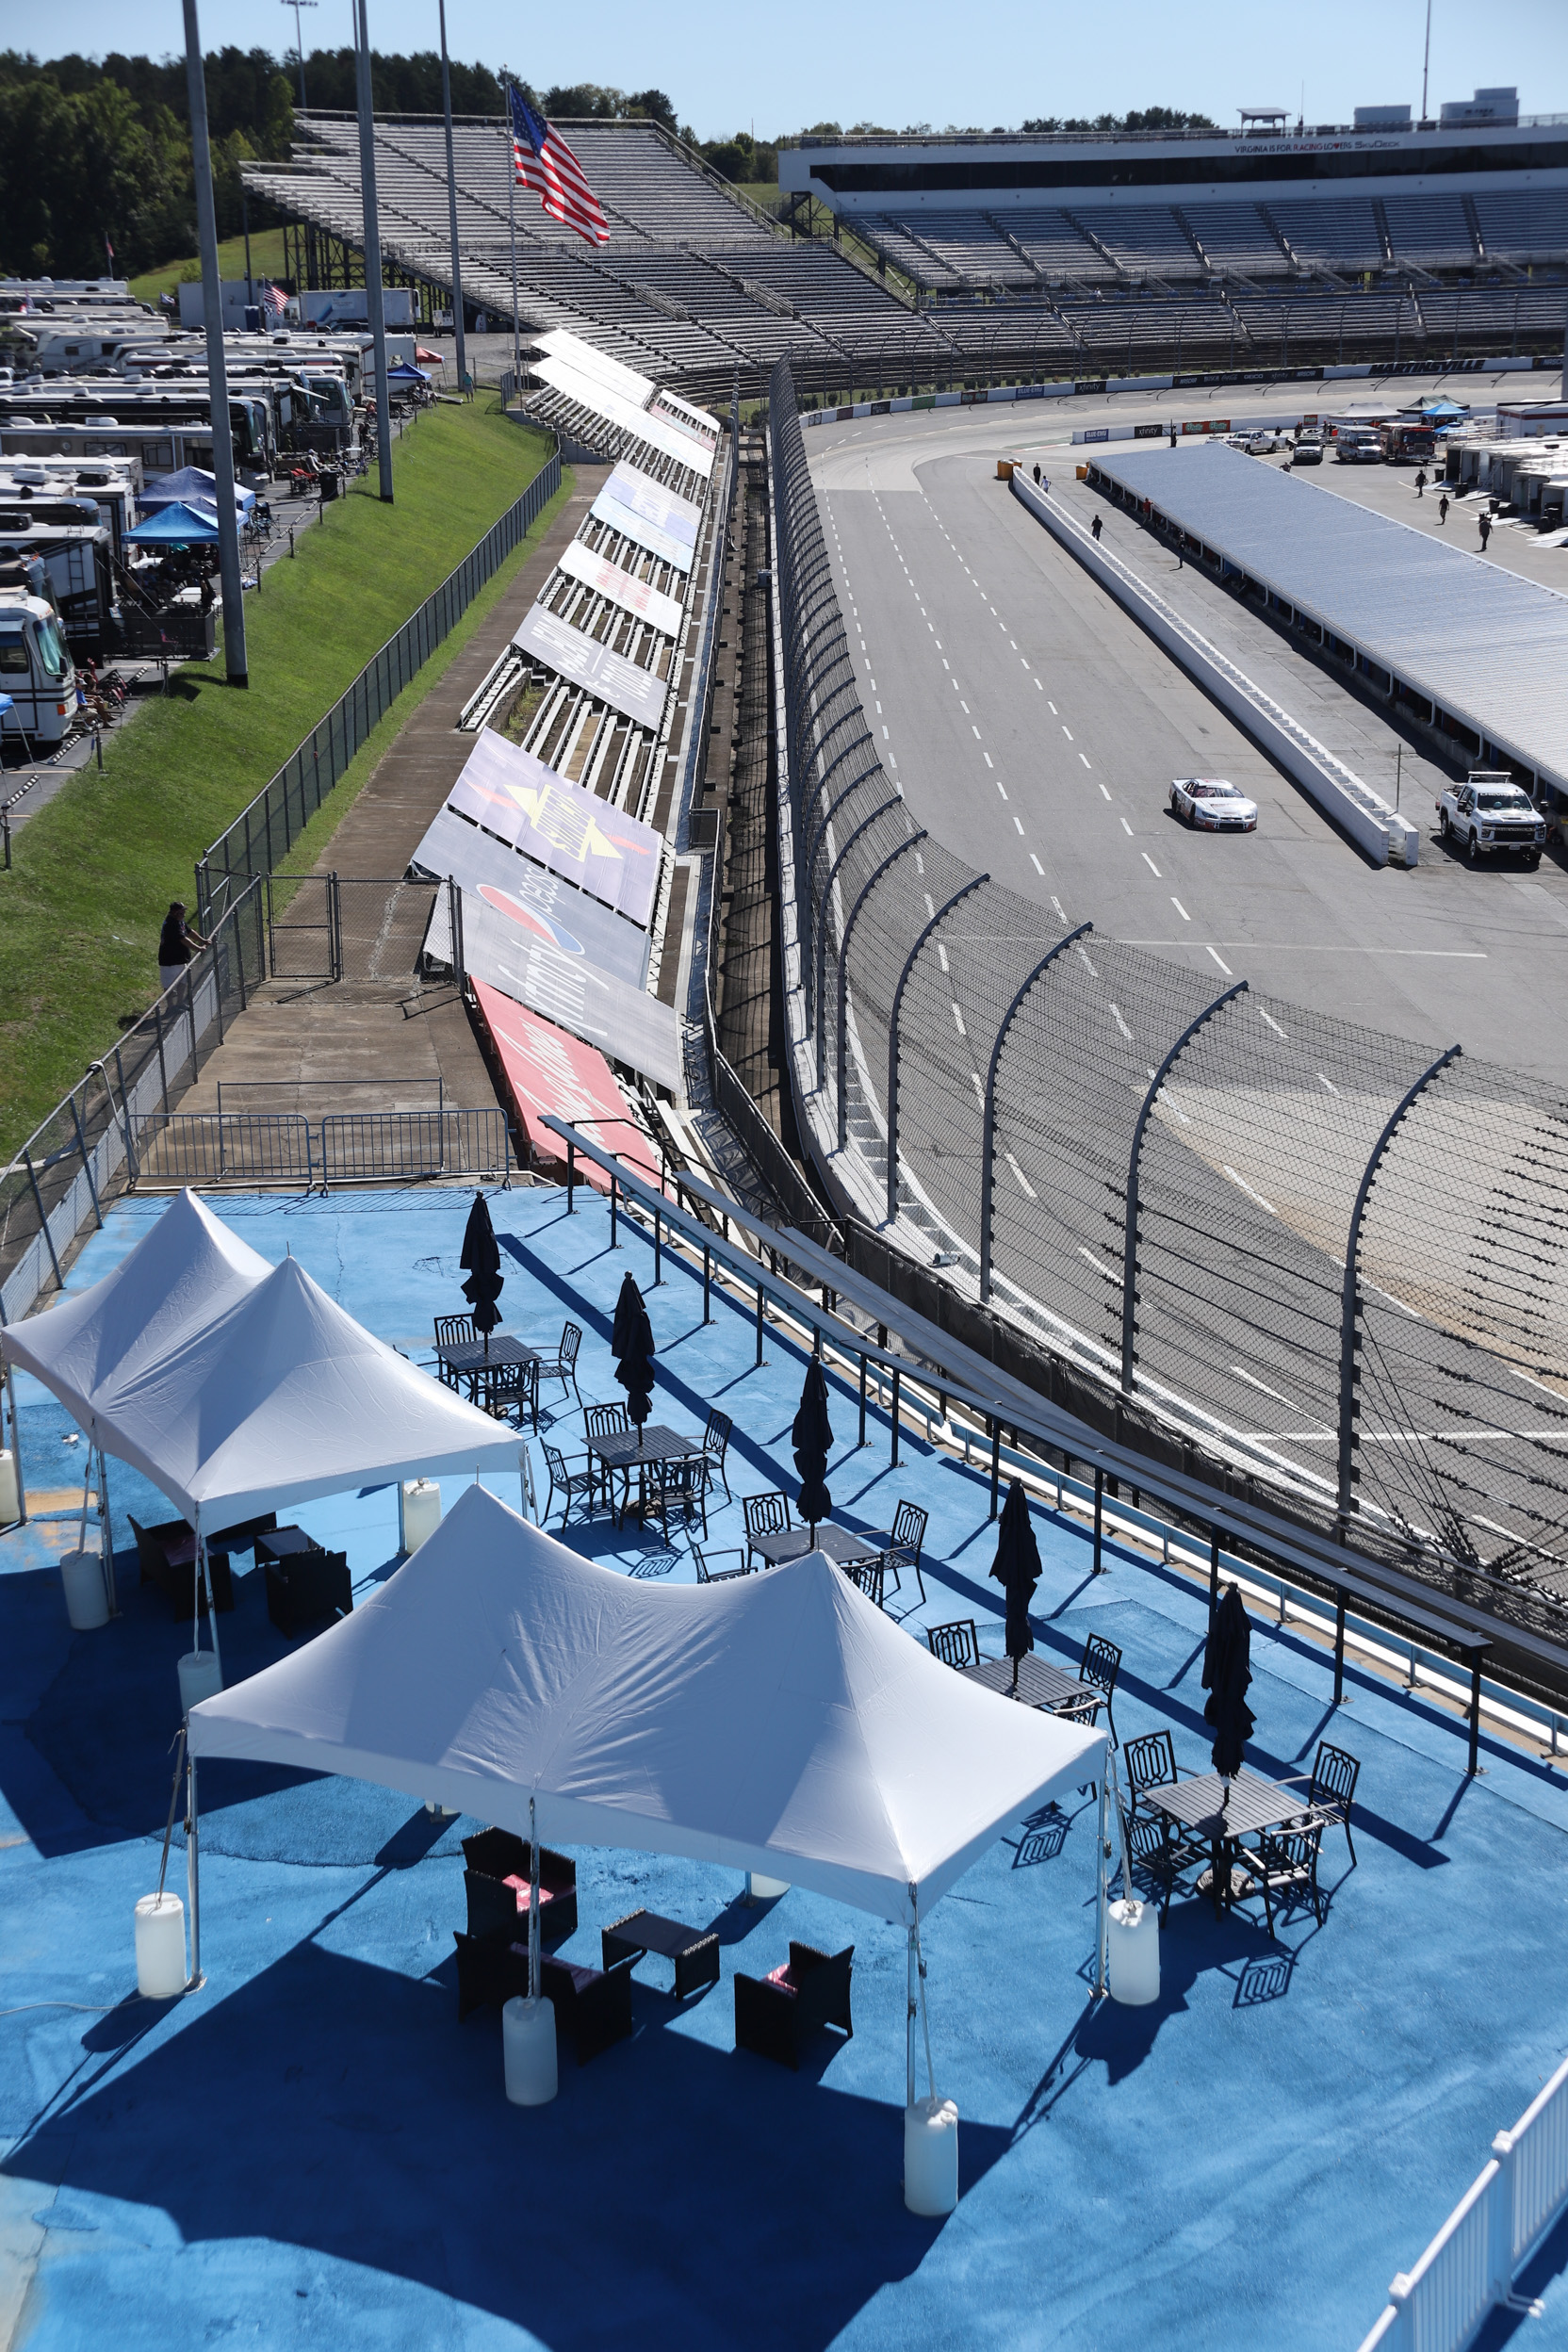 Martinsville Speedway Introduces New Fan Experience, The Brake Pad